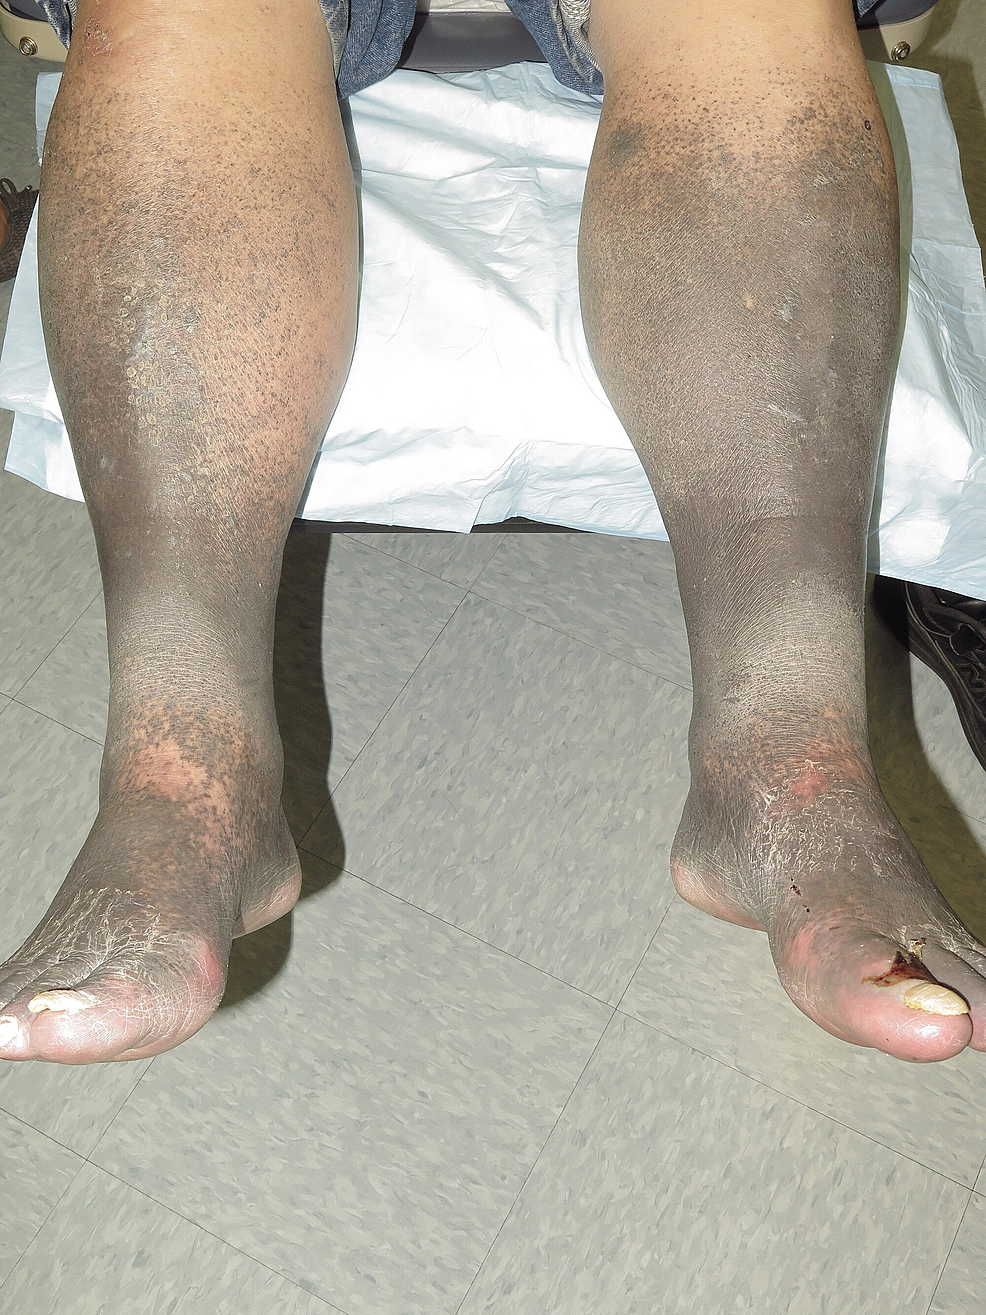 Cureus | A Severe Case of Minocycline-induced Hyperpigmentation of the